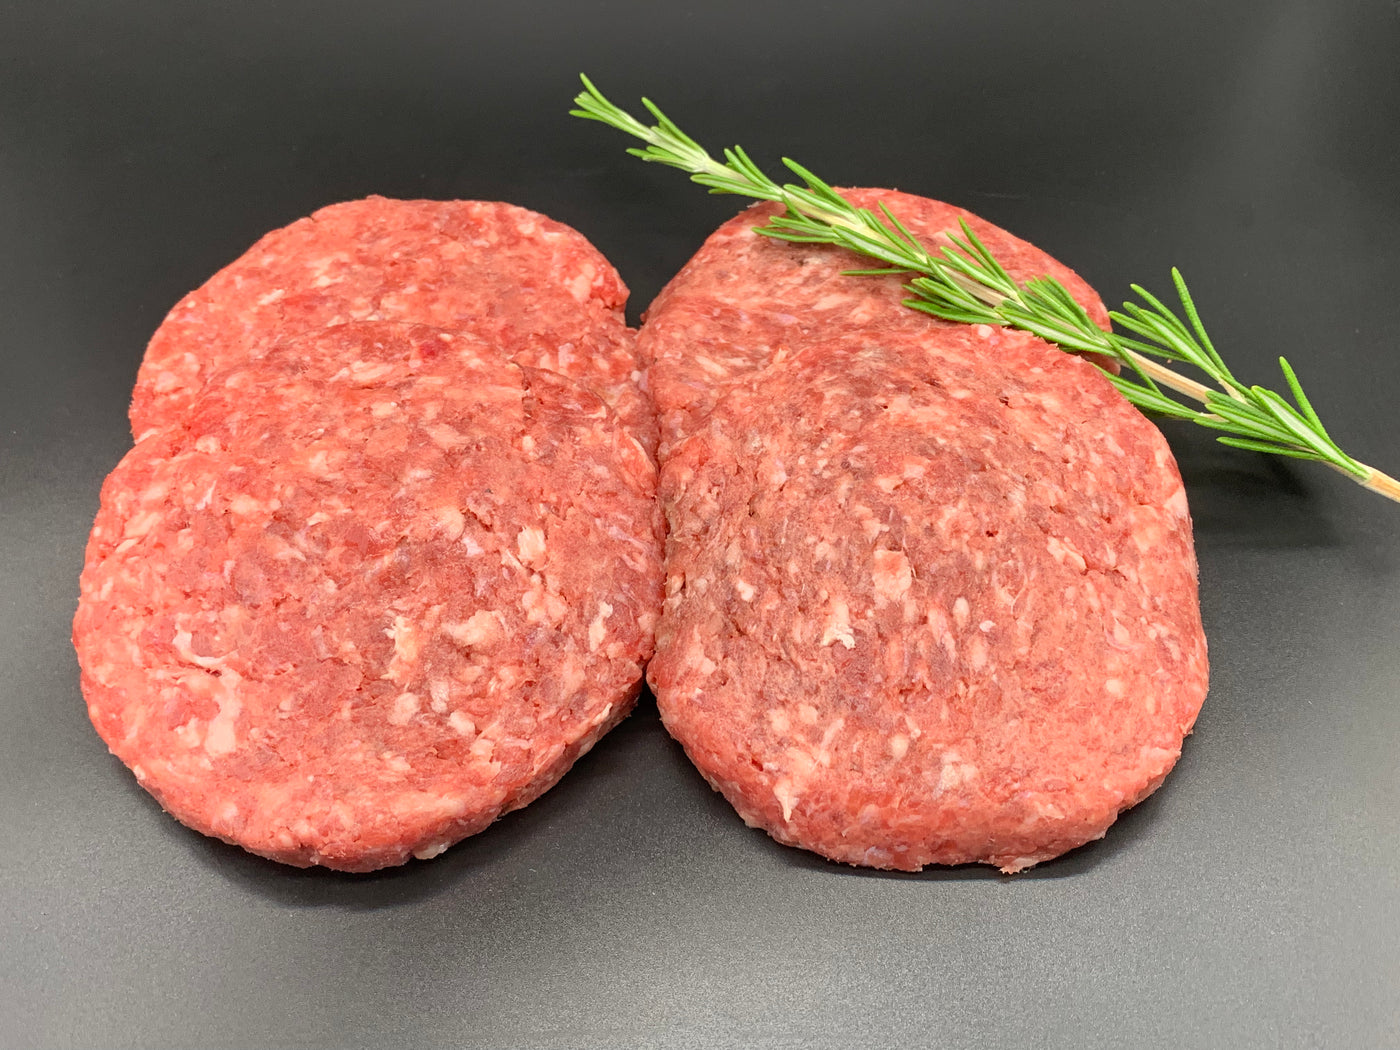 Beef and Onion Burgers